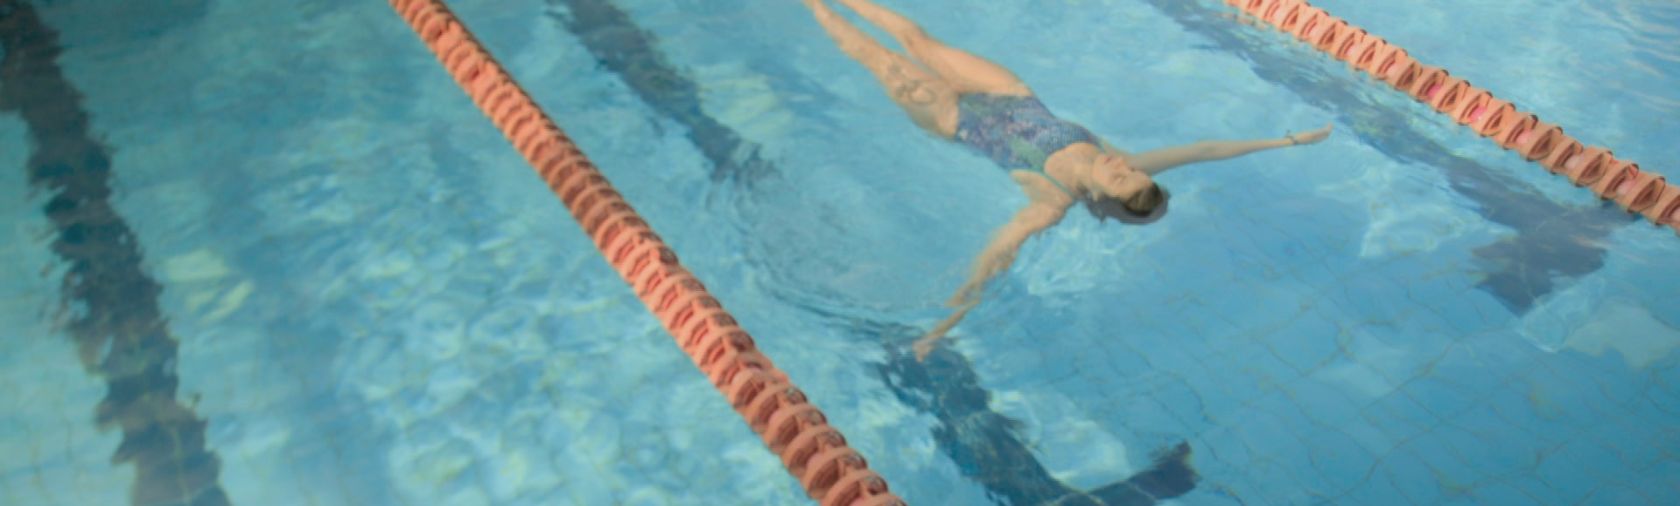 Woman in a blue one-piece bathing suit floats facing upwards in a pool